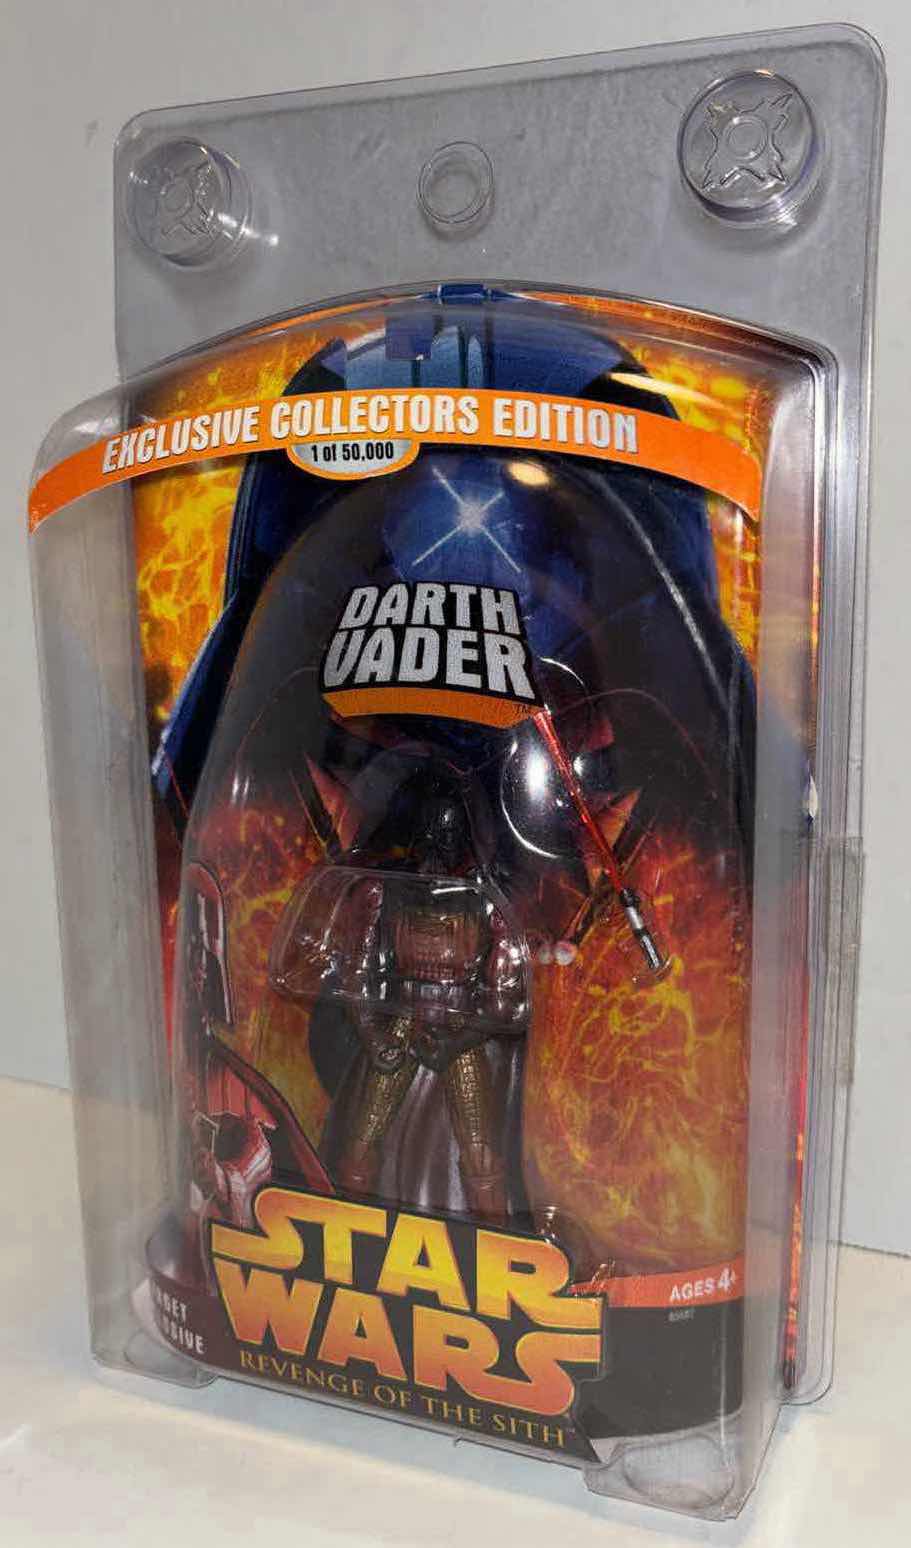 Photo 3 of NEW 2005 HASBRO STAR WARS REVENGE OF THE SITH TARGET EXCLUSIVE “DARTH VADER” ACTION FIGURE & ACCESSORIES, EXCLUSIVE COLLECTORS EDITION 1 of 50,000 IN CLEAR CLAMSHELL CASE